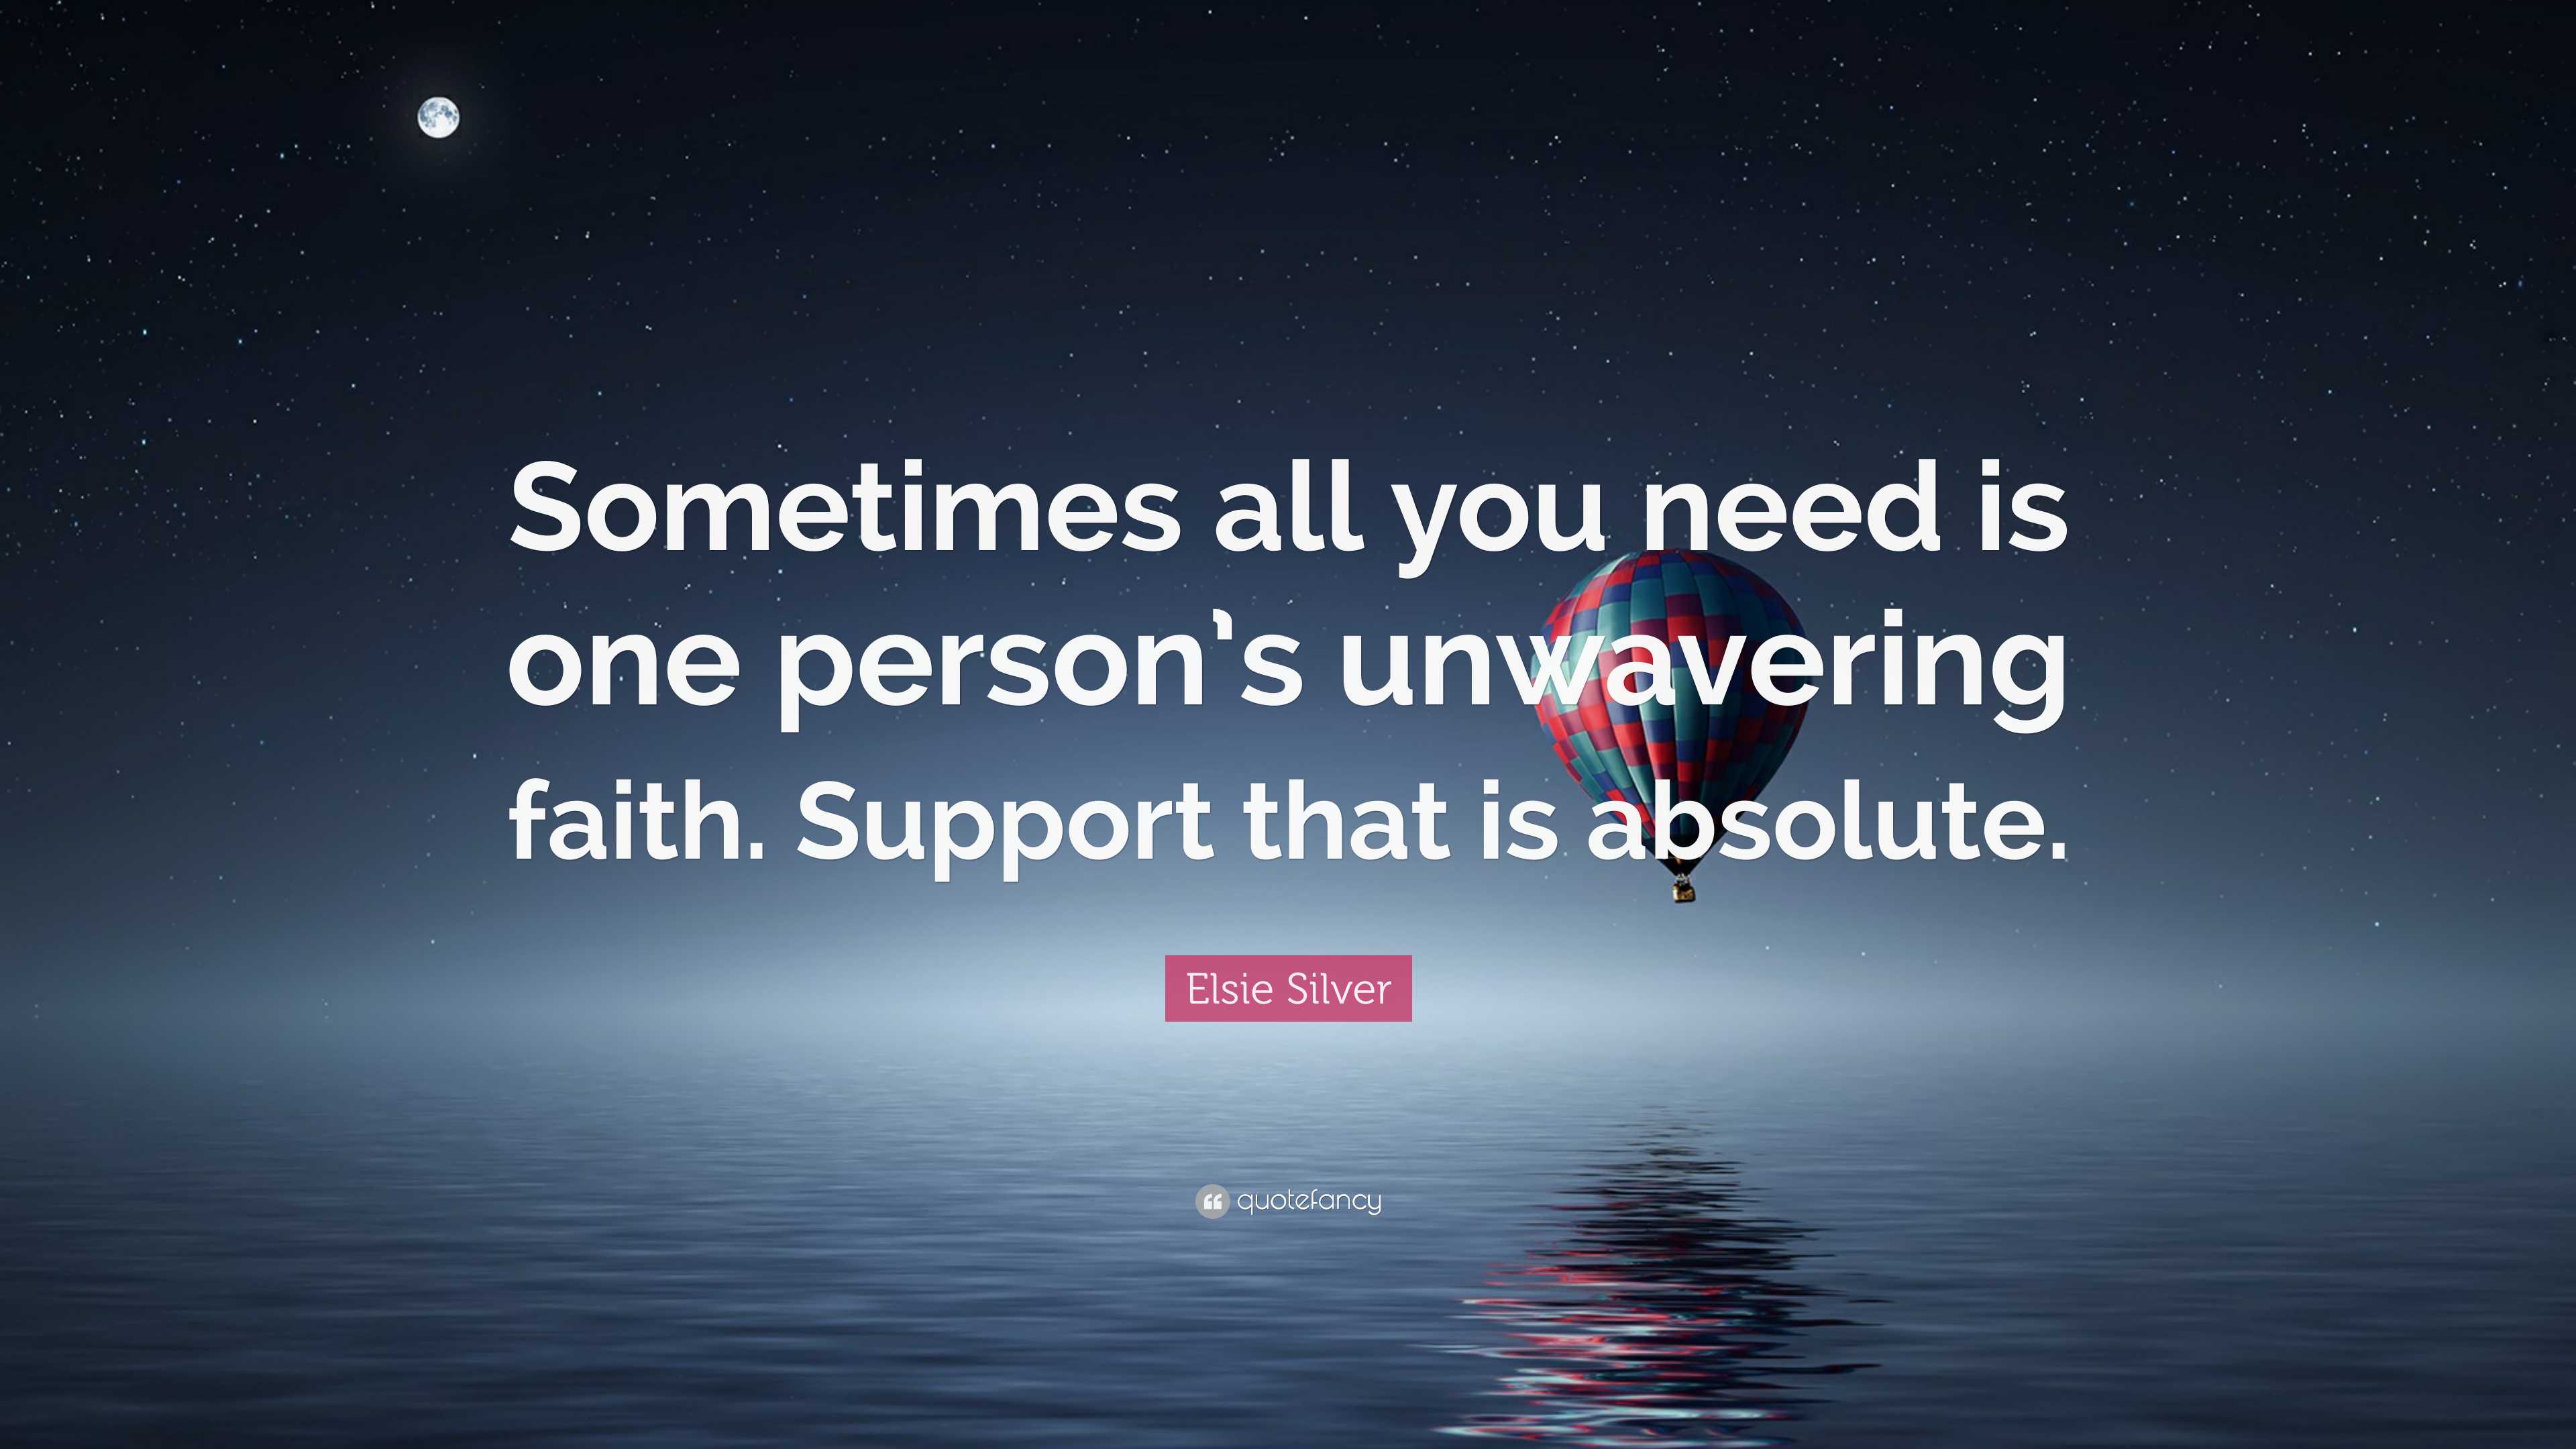 Elsie Silver Quote: “Sometimes all you need is one person's unwavering  faith. Support that is absolute.”